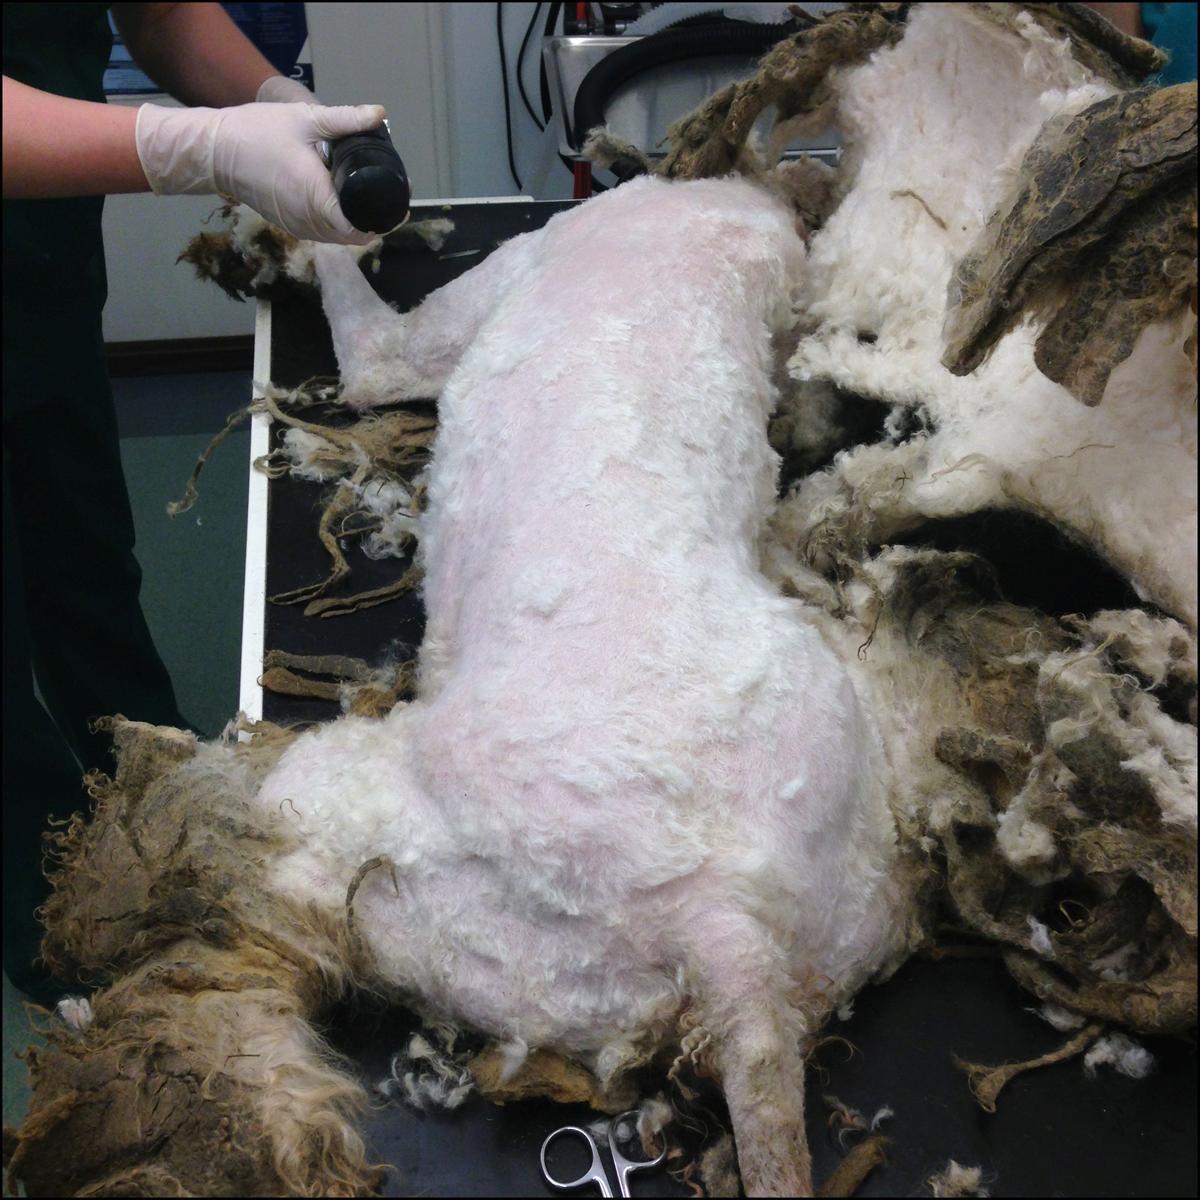 Images of dogs abandoned in horrific condition.